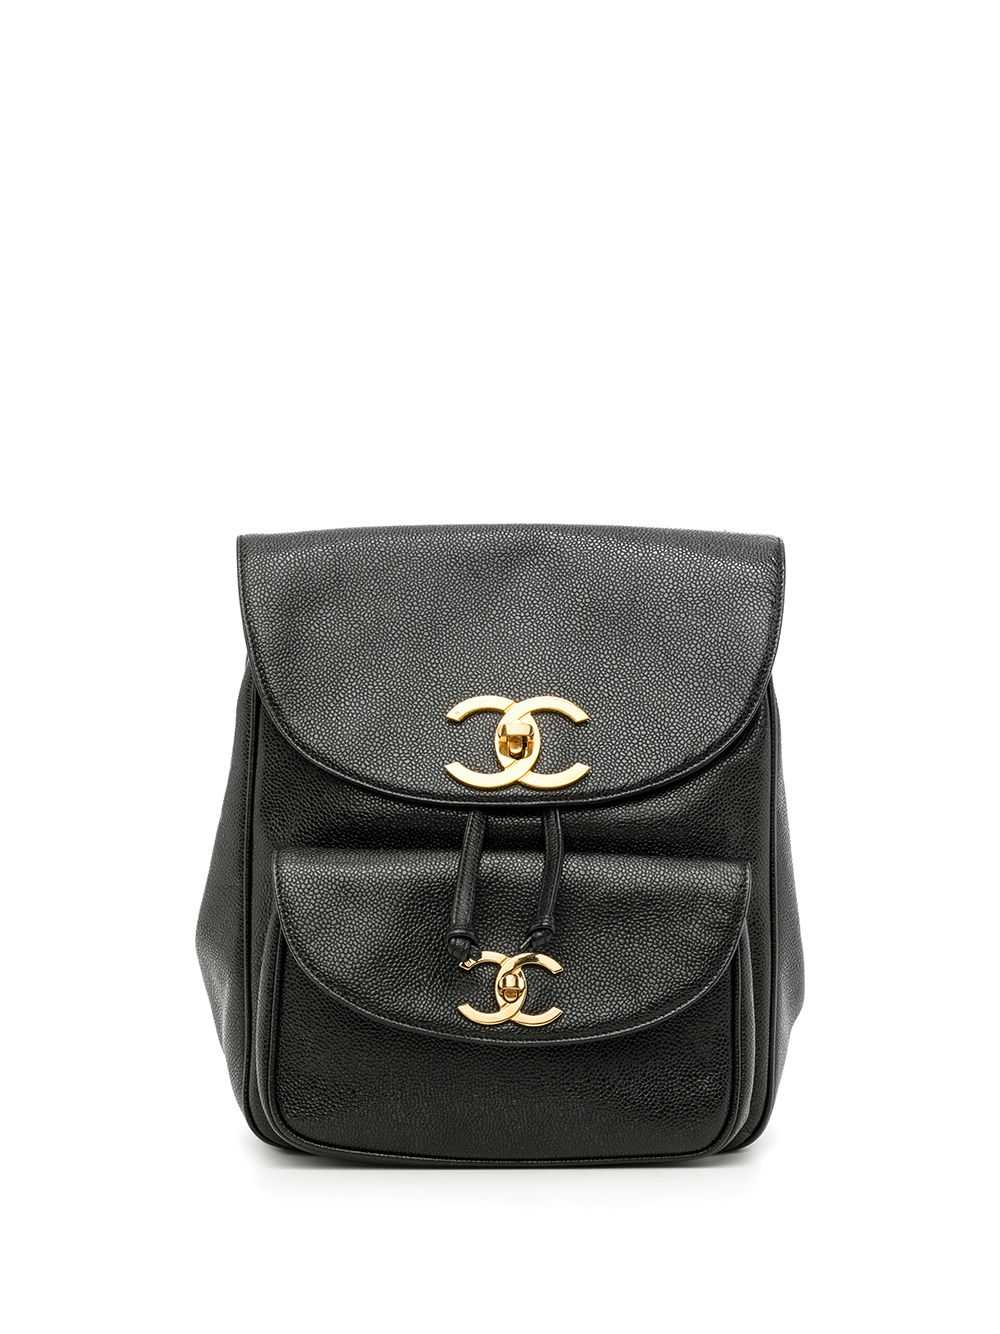 CHANEL Pre-Owned 1995 CC Turn-lock backpack - Bla… - image 1